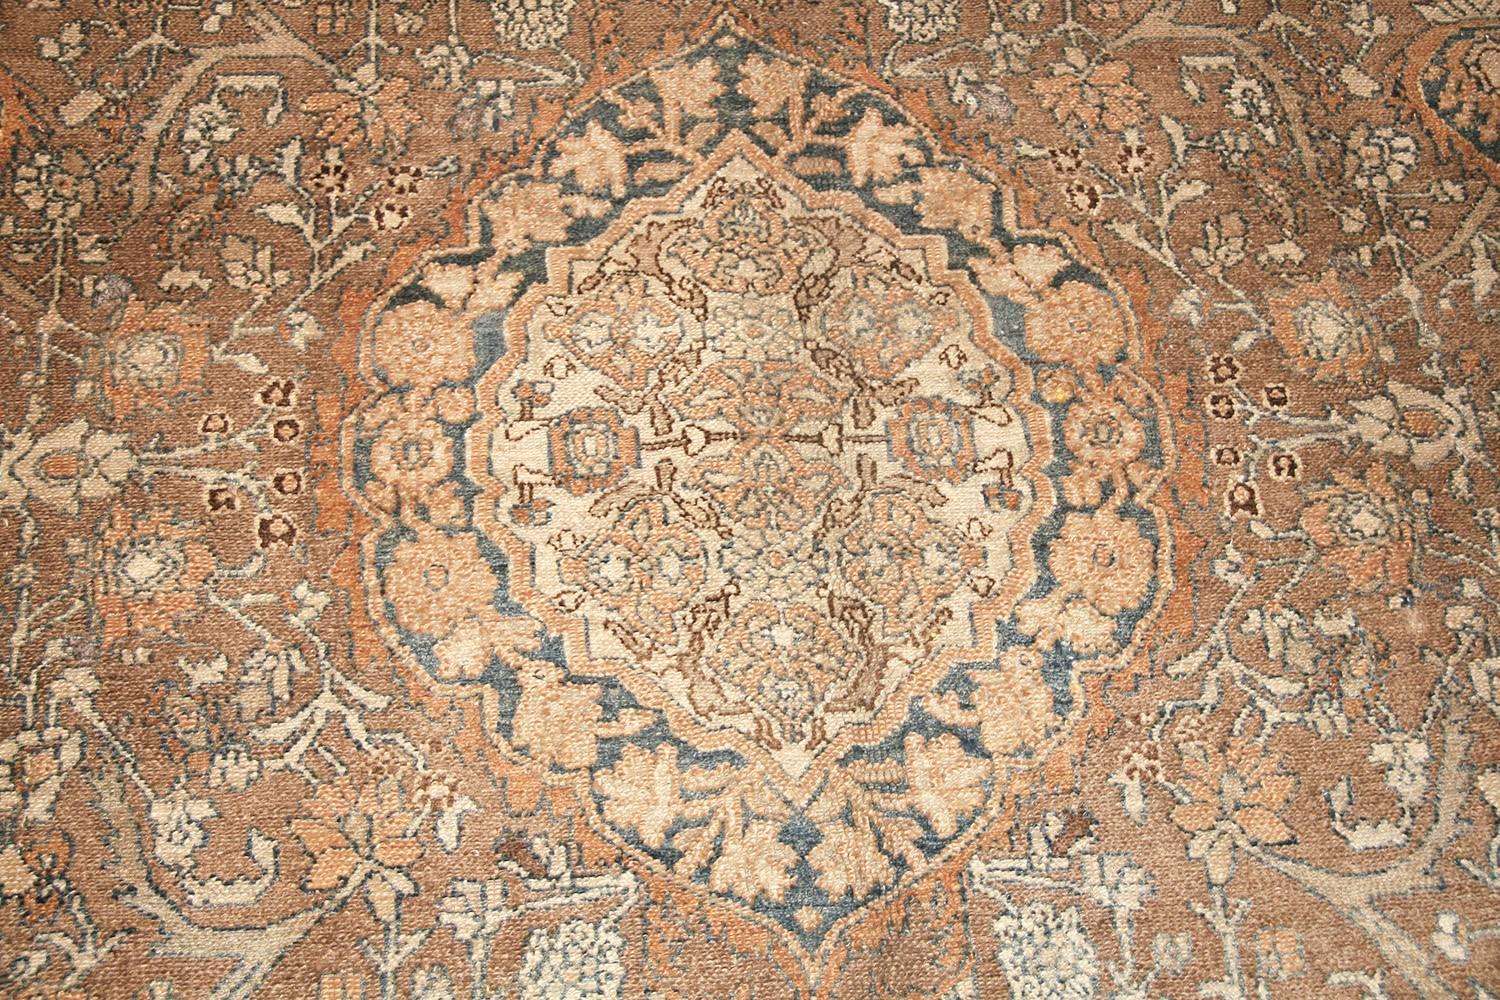 Antique rugs from Bibikabad rugs are related to Malayer rugs in technique. They tend to come in allover designs, usually the Herati pattern or Boteh (Paisley), which may at times have a medallion as well. Even the borders on Bibikabads are based on